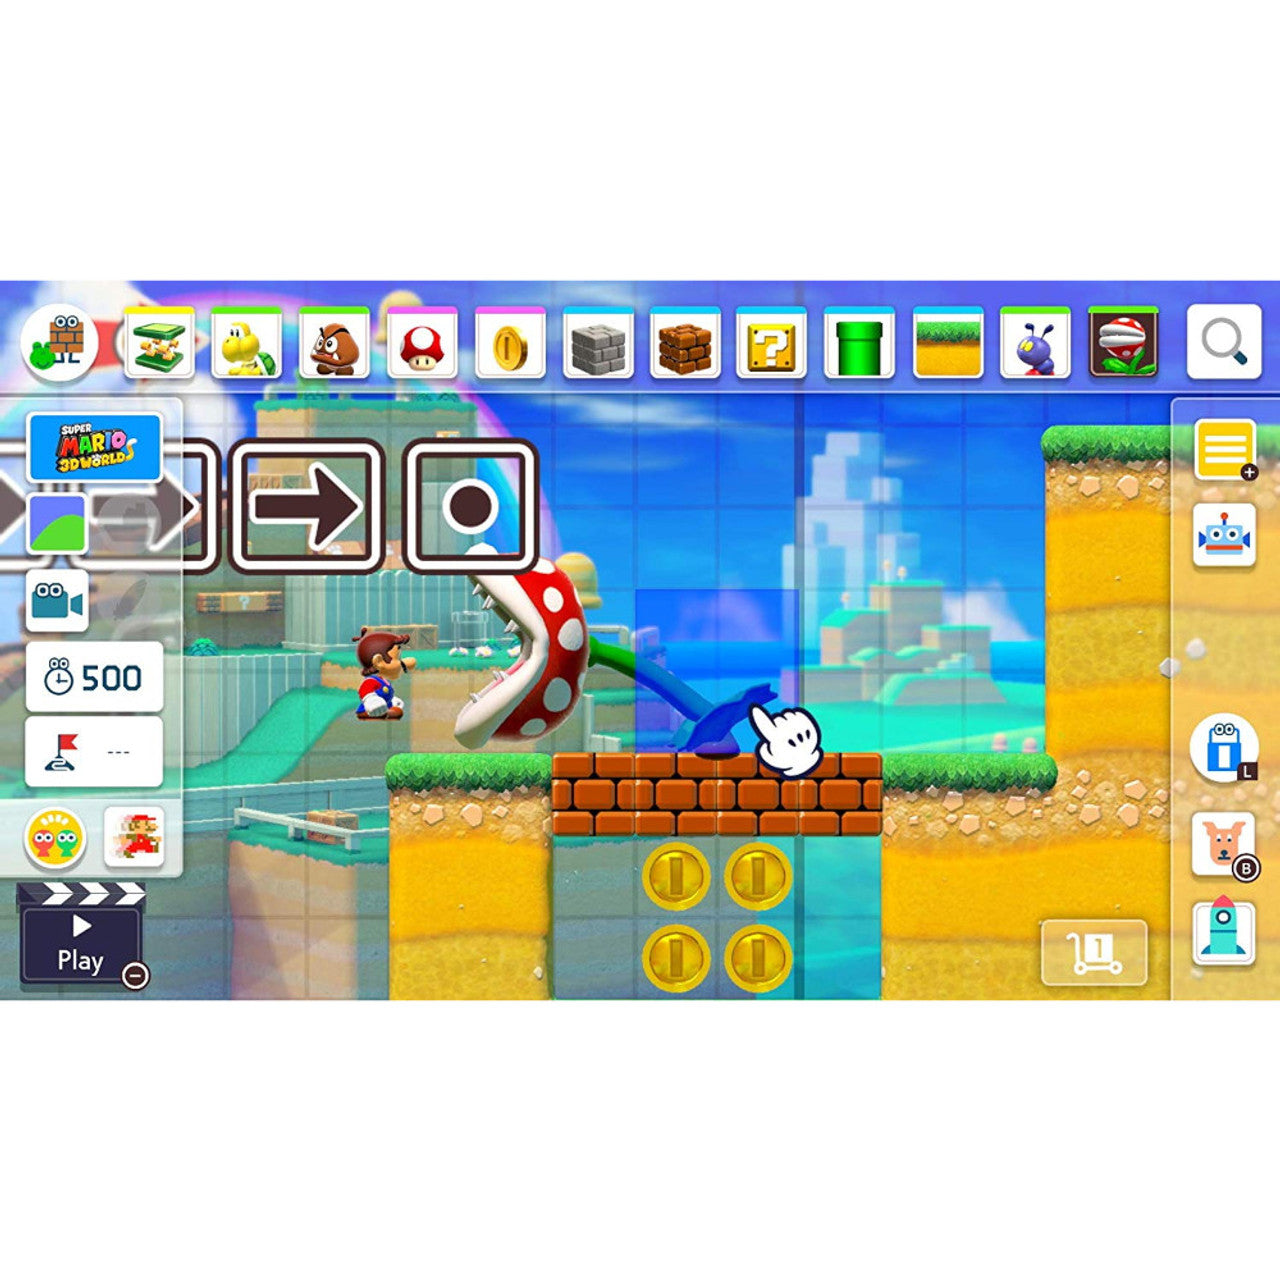 Product Image : This is brand new.<br>Mario fans of the world, unite! Now you can play, create, and share the side-scrolling Super Mario courses of your dreams in the Super Mario Maker 2 game, available exclusively on the Nintendo Switch system! Dive into the single-player Story Mode and play built-in courses to rebuild Princess Peach's castle. Make your own courses, alone or together. And with a Nintendo Switch Online membership, share your courses, access a near-endless supply made by others, enjoy online